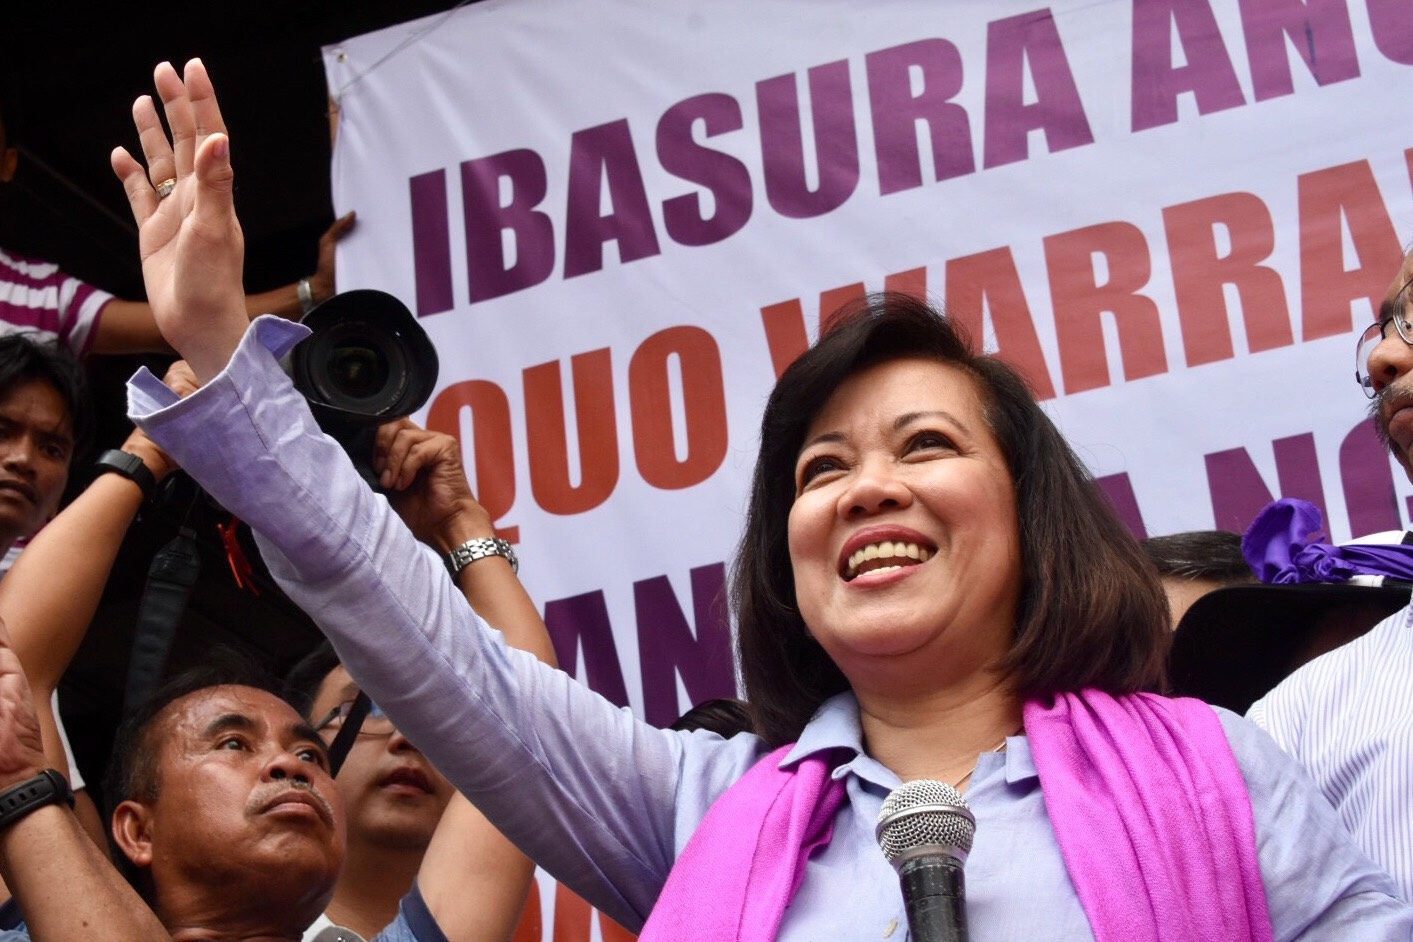 After ouster as CJ, Sereno says ‘the fight has just started’